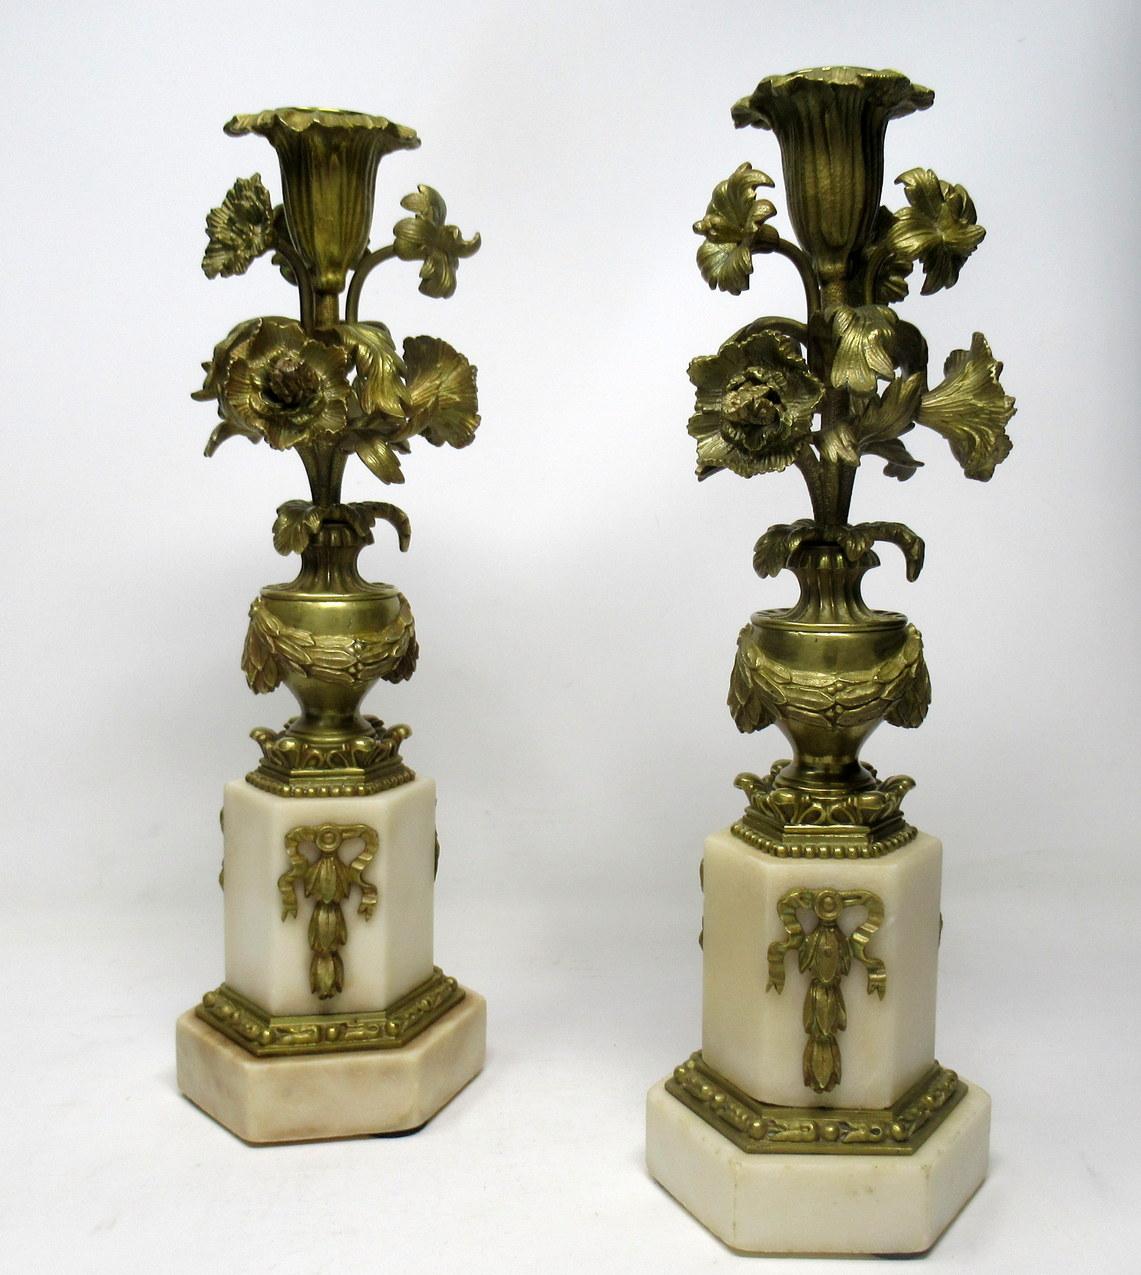 A very impressive example of a pair of single light statutory cream marble and ormolu candlesticks of outstanding quality and medium proportions.

Last half of the 19th century. 

The elaborate upward scrolling naturalistic central support